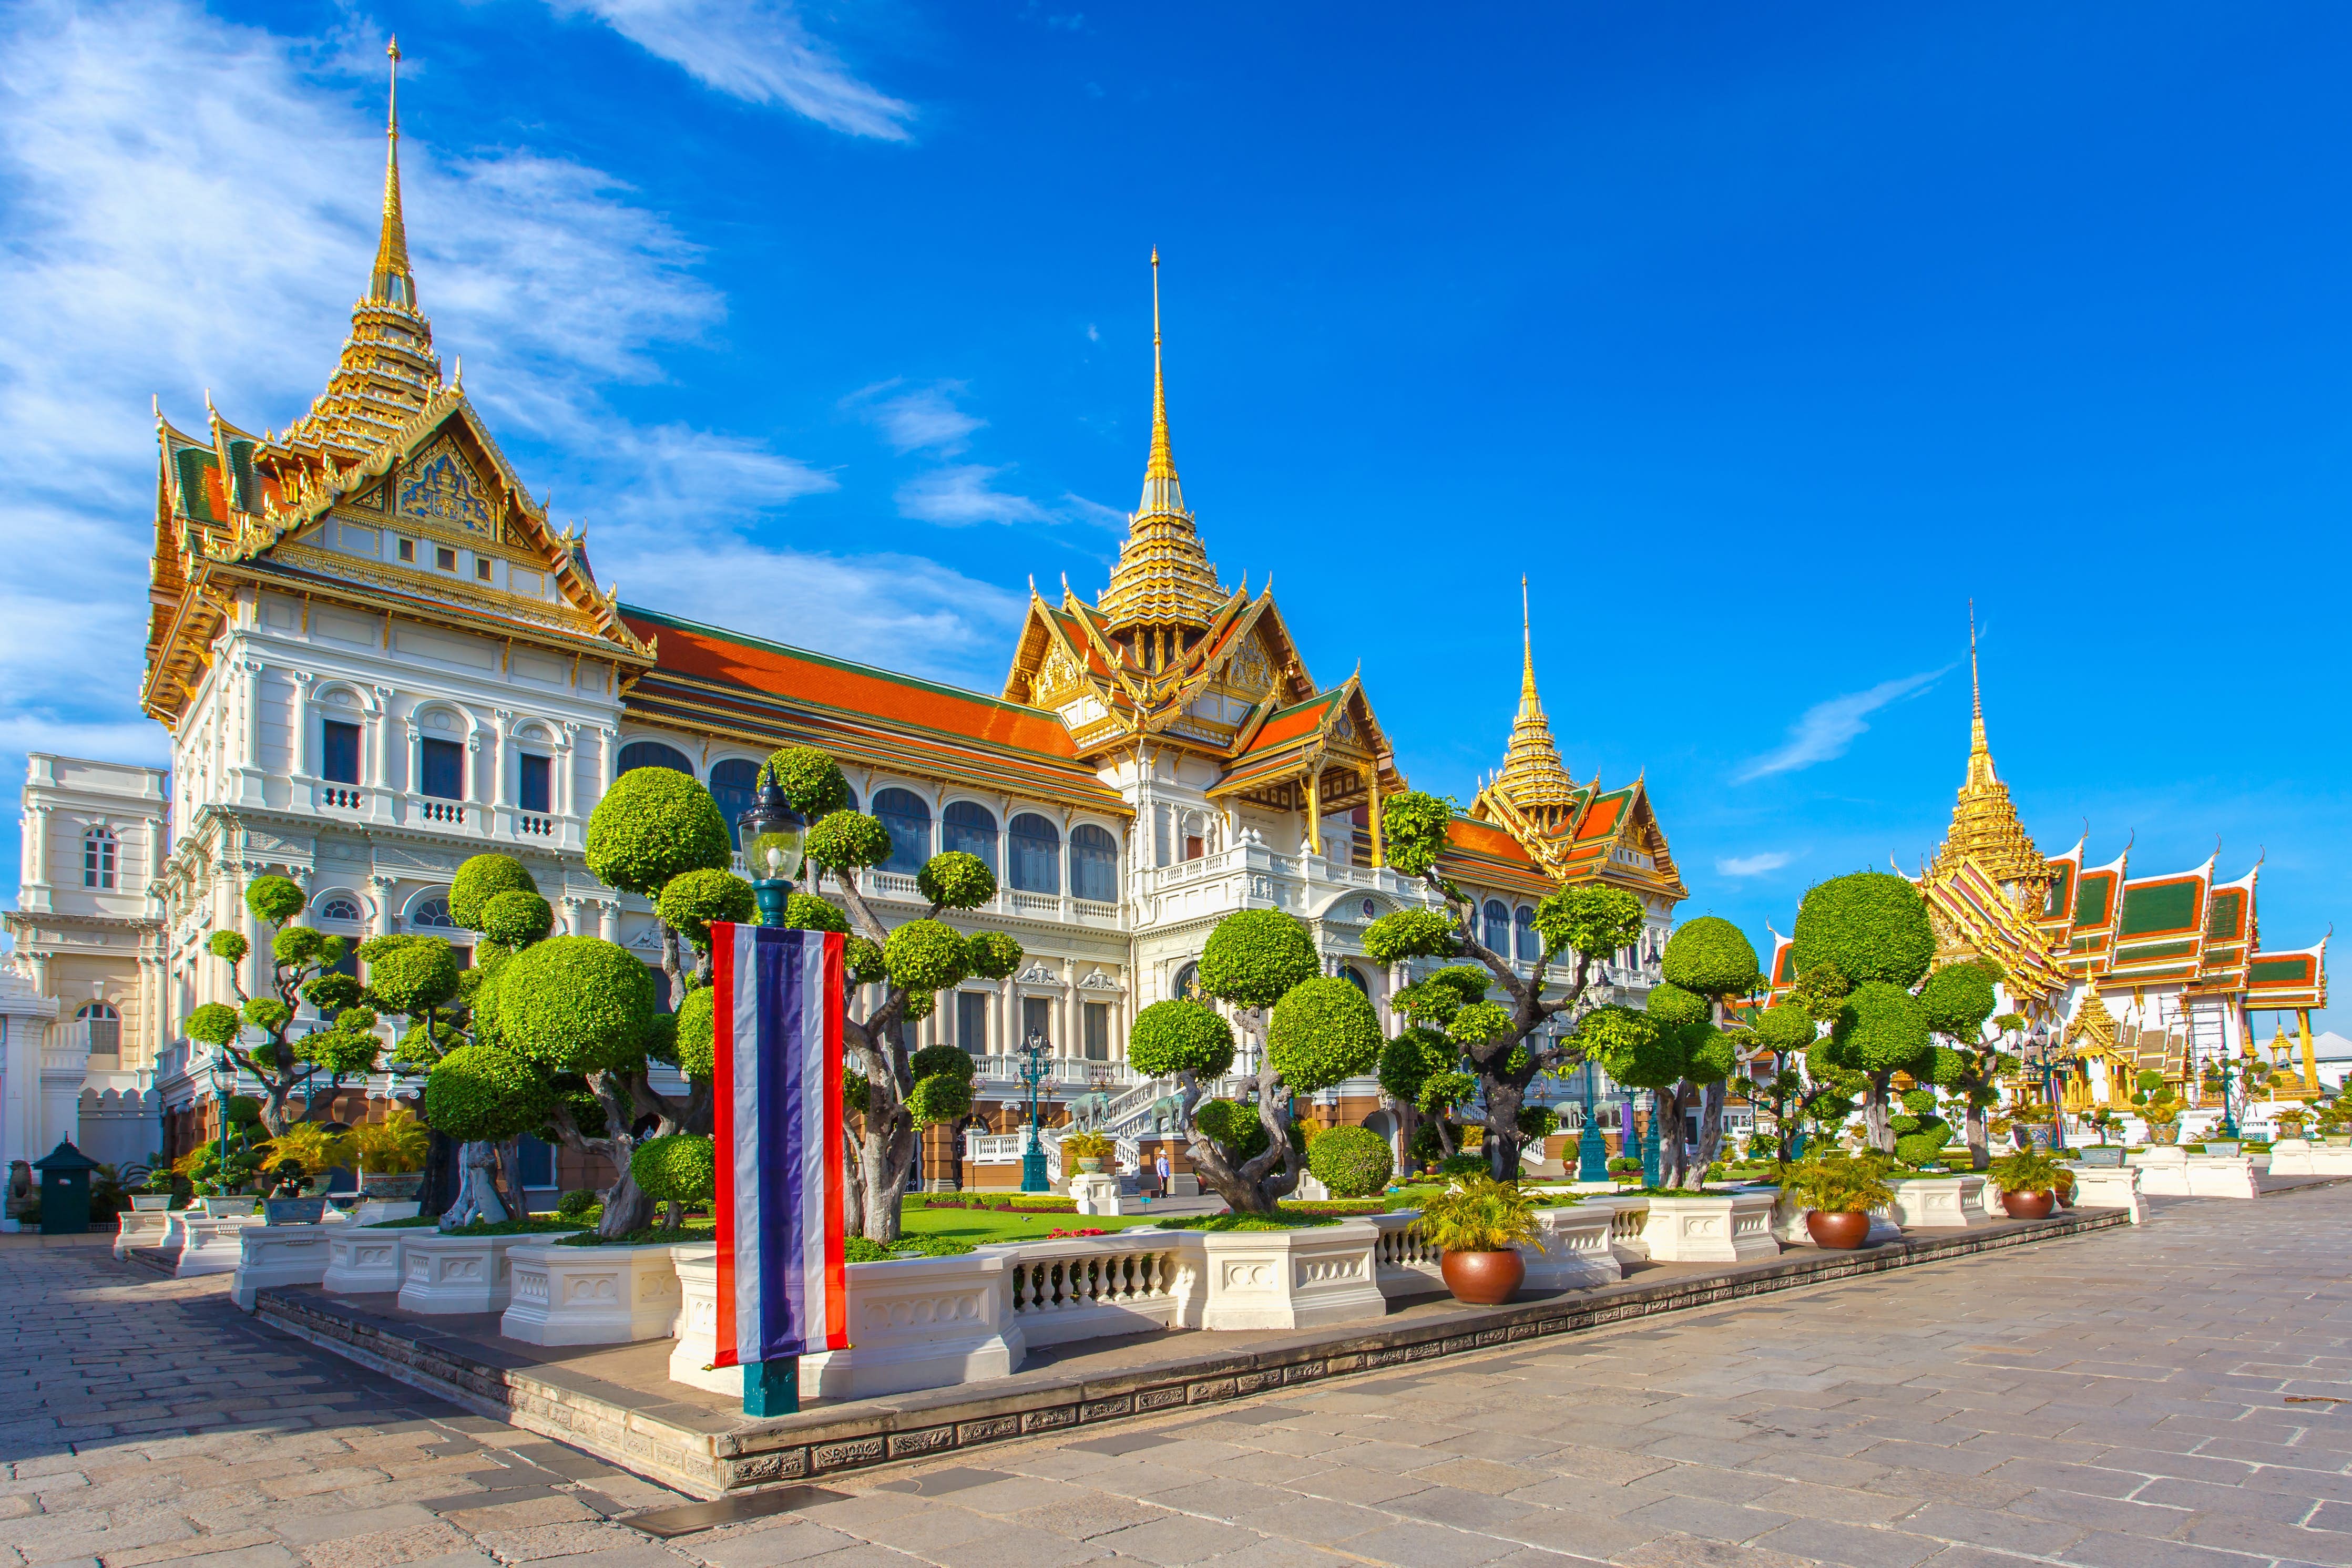 Discover The Royal Grand Palace and the Unique Temples